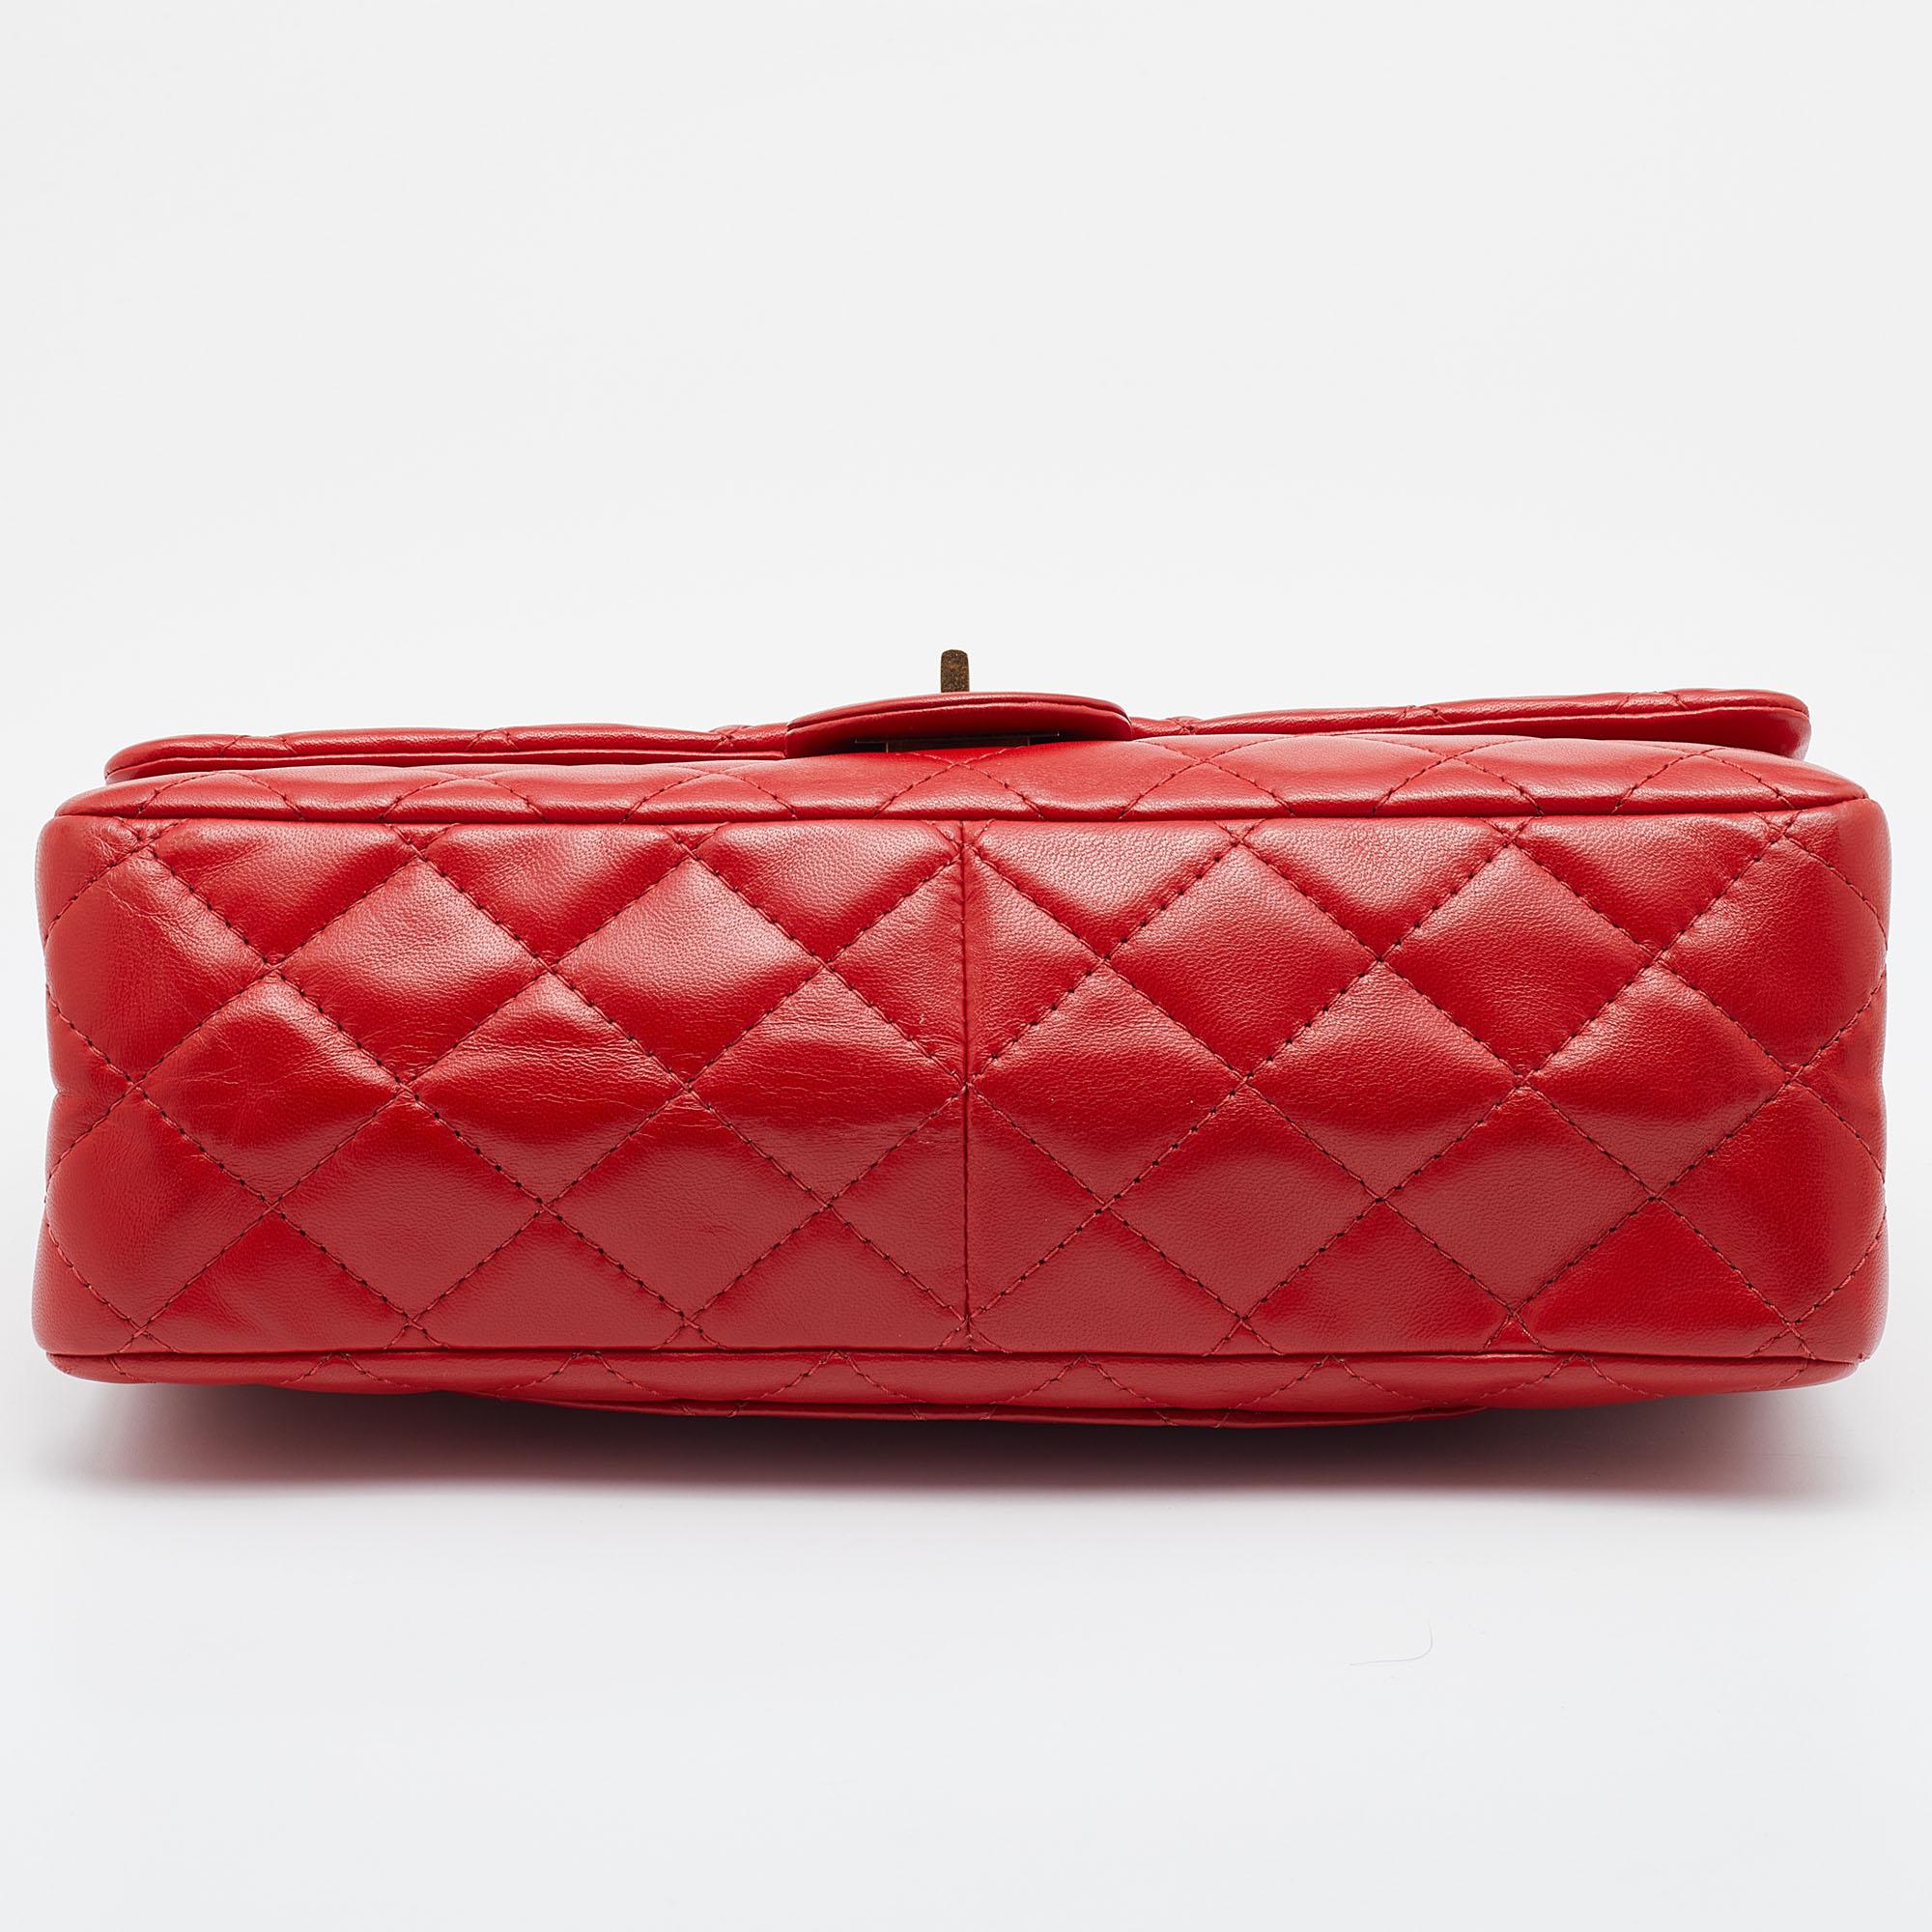 Chanel Red Lipstick Quilted Leather Reissue 2.55 Classic 226 Flap Bag 1